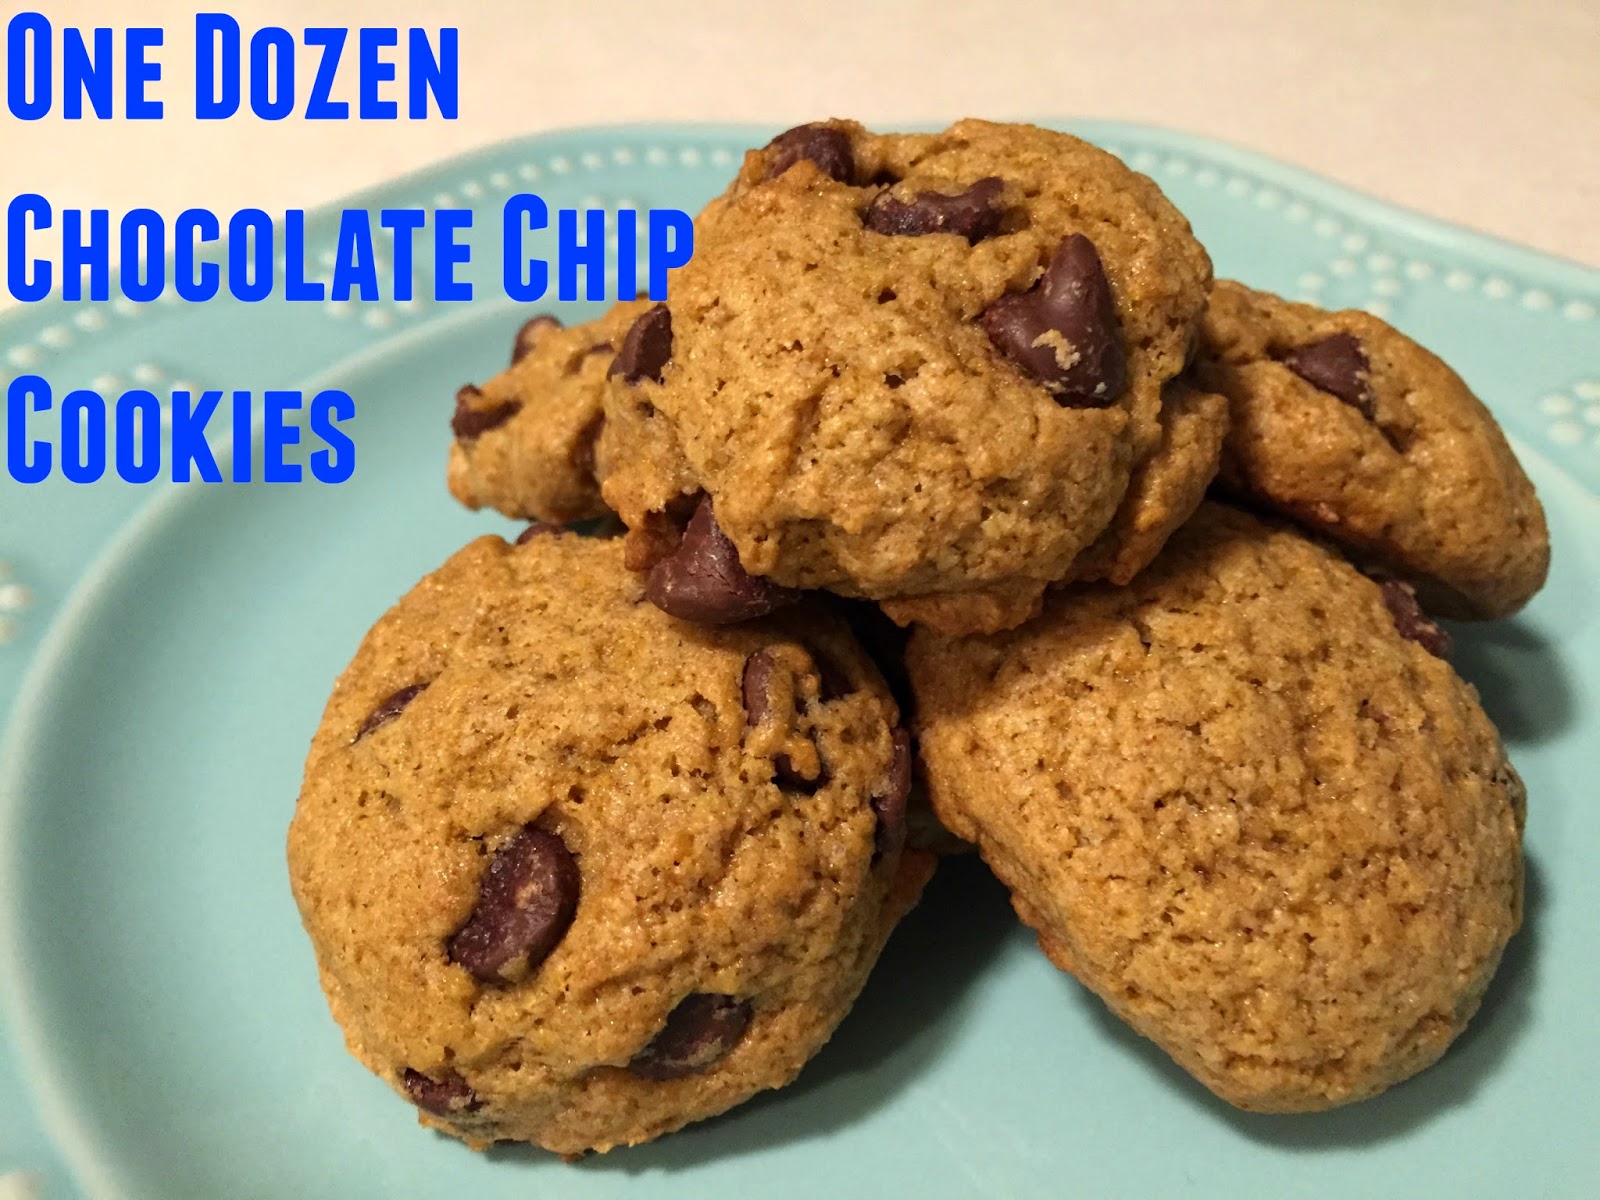 The Simple Life: One Dozen Chocolate Chip Cookies